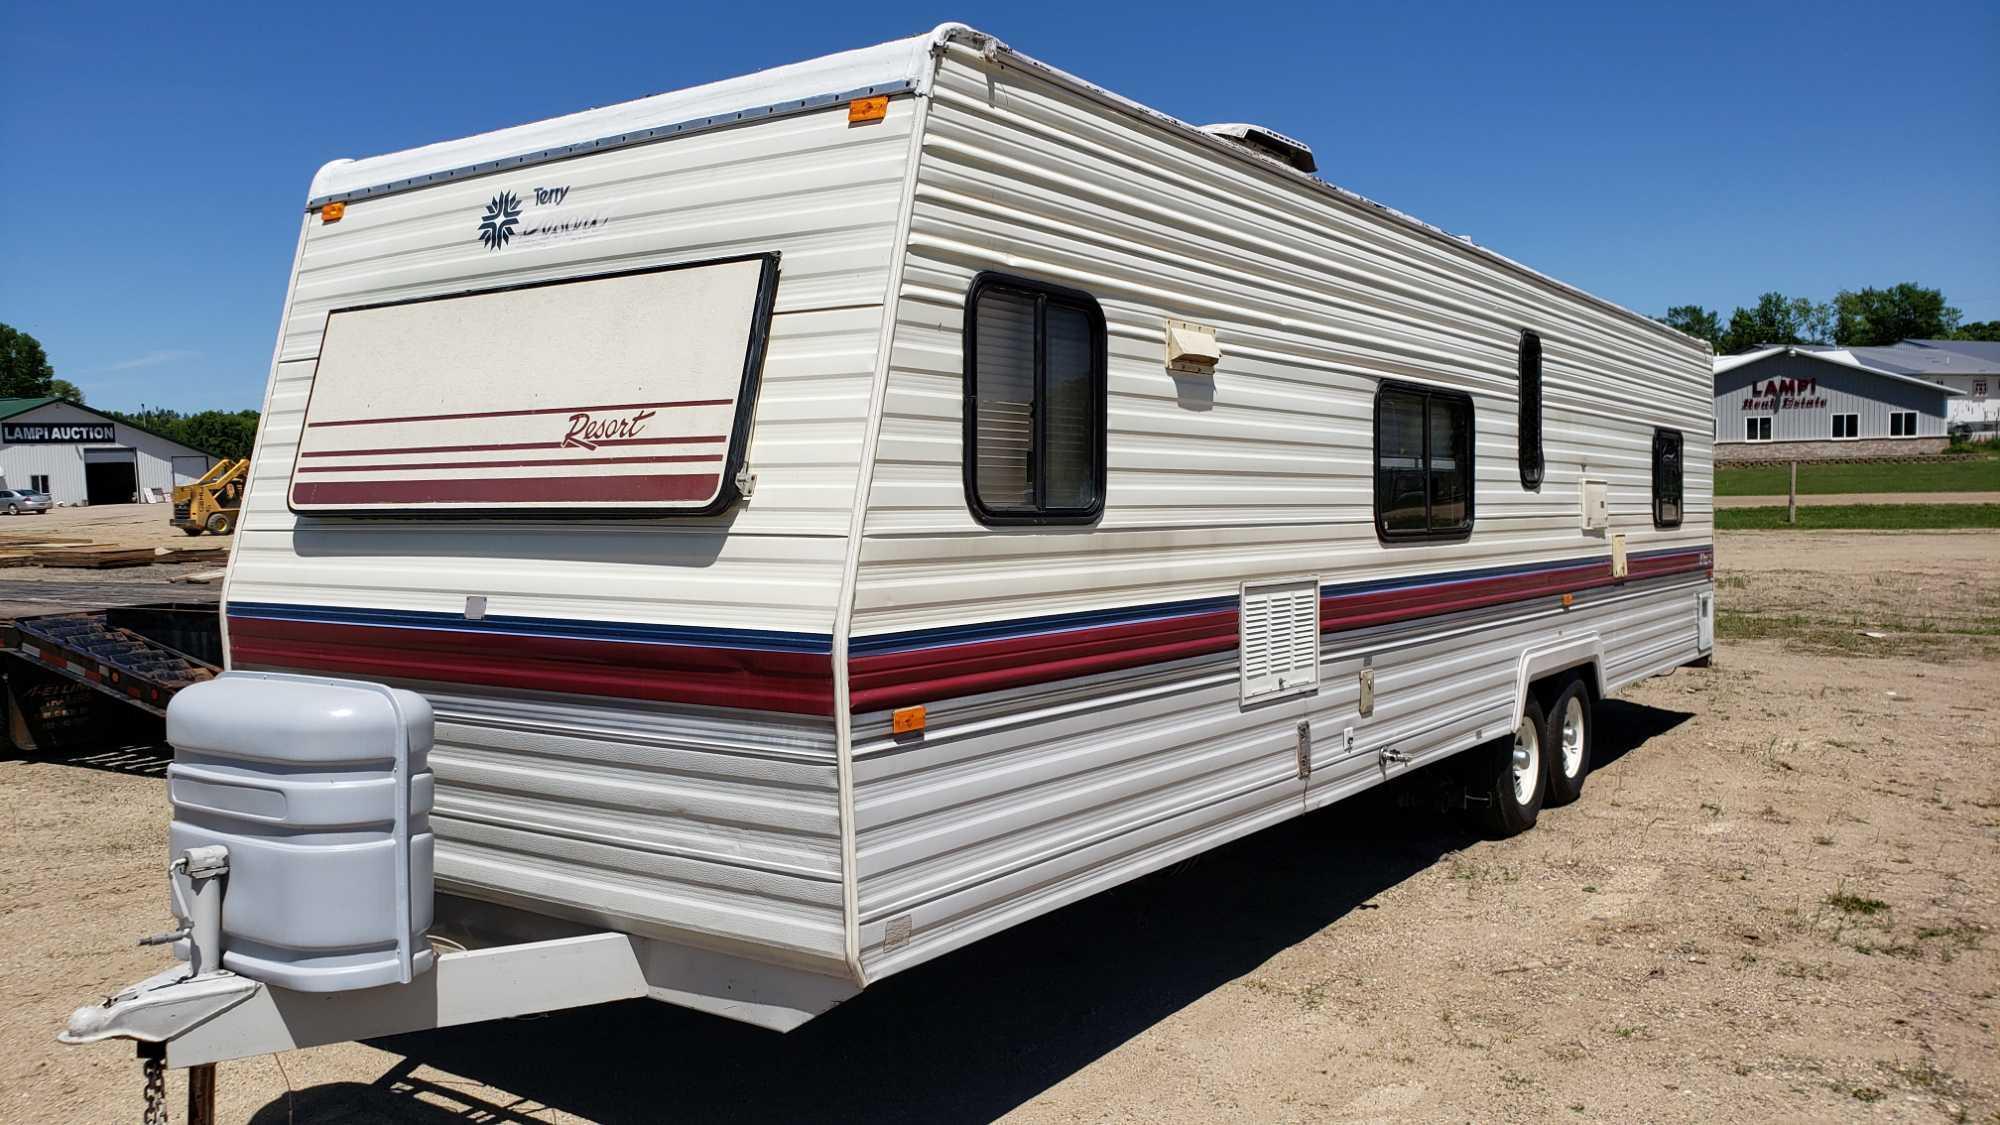 1990 Fleetwood Terry RX Resort 32' camper, tandem axle, A/C, furnace, outdo